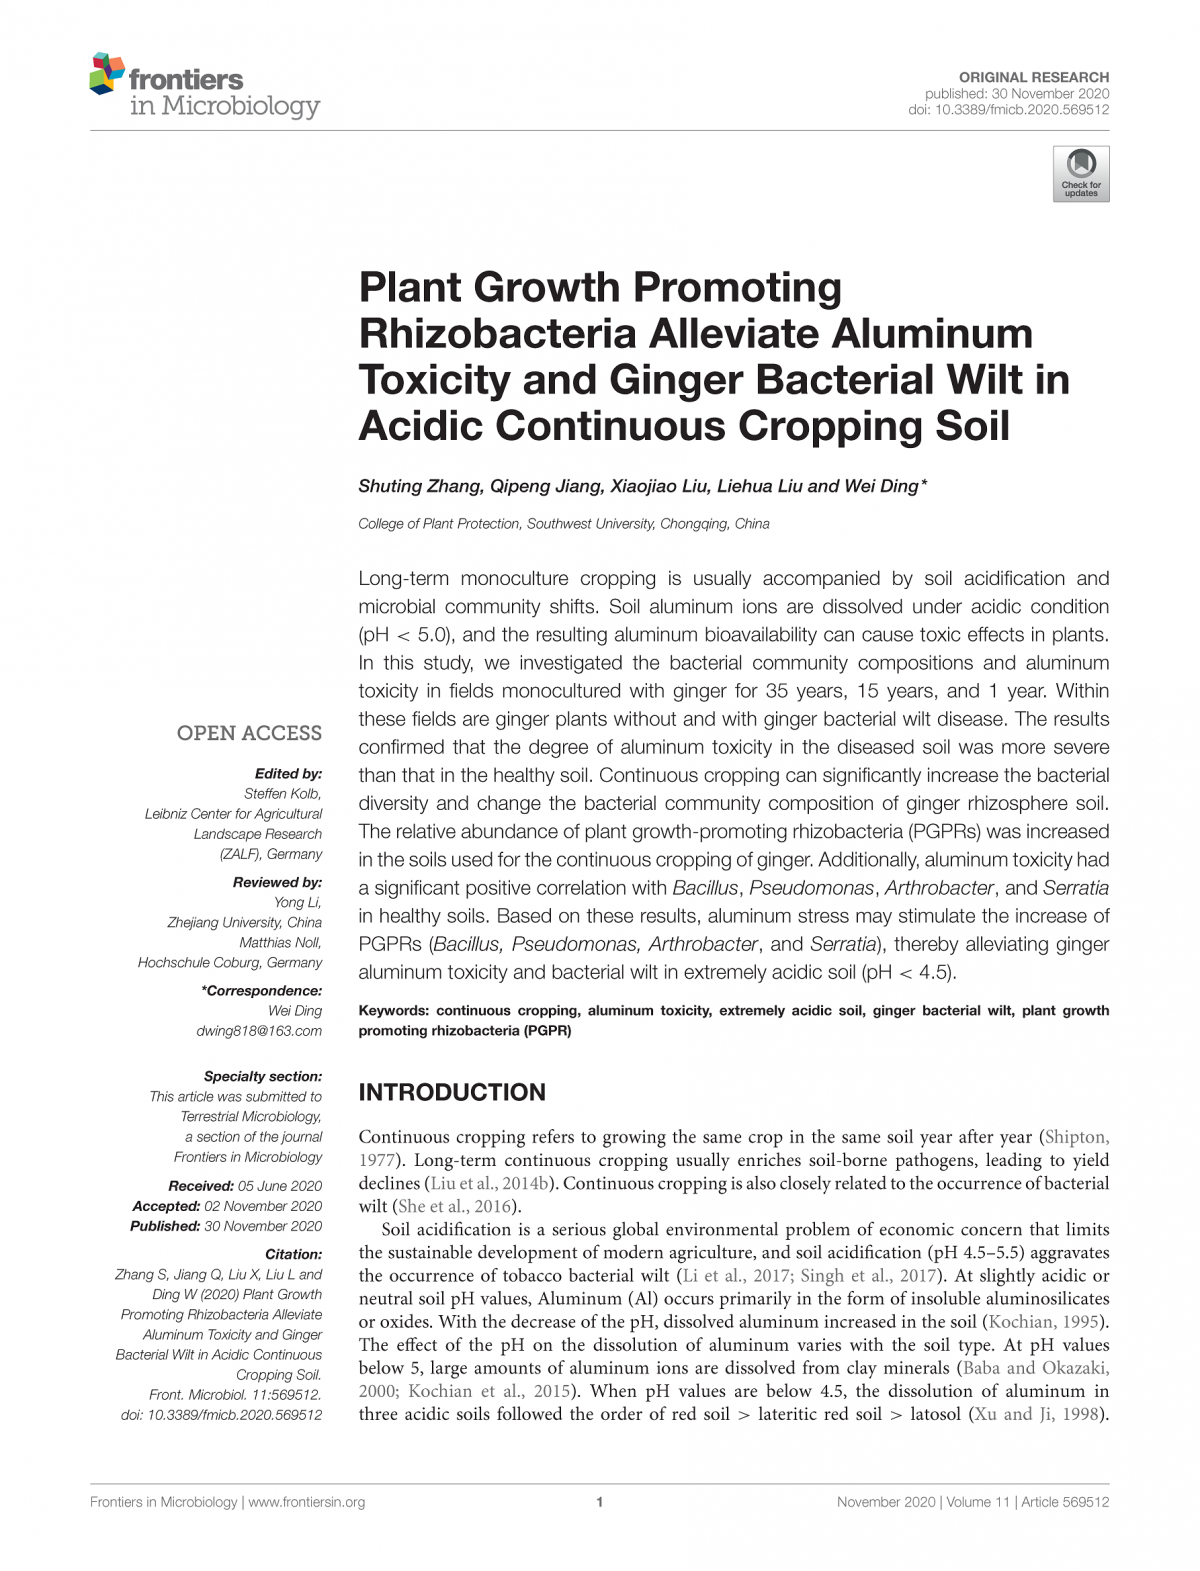 Plant Growth Promoting Rhizobacteria Alleviate Aluminum Toxicity and Ginger Bacterial Wilt in Acidic Continuous Cropping Soil